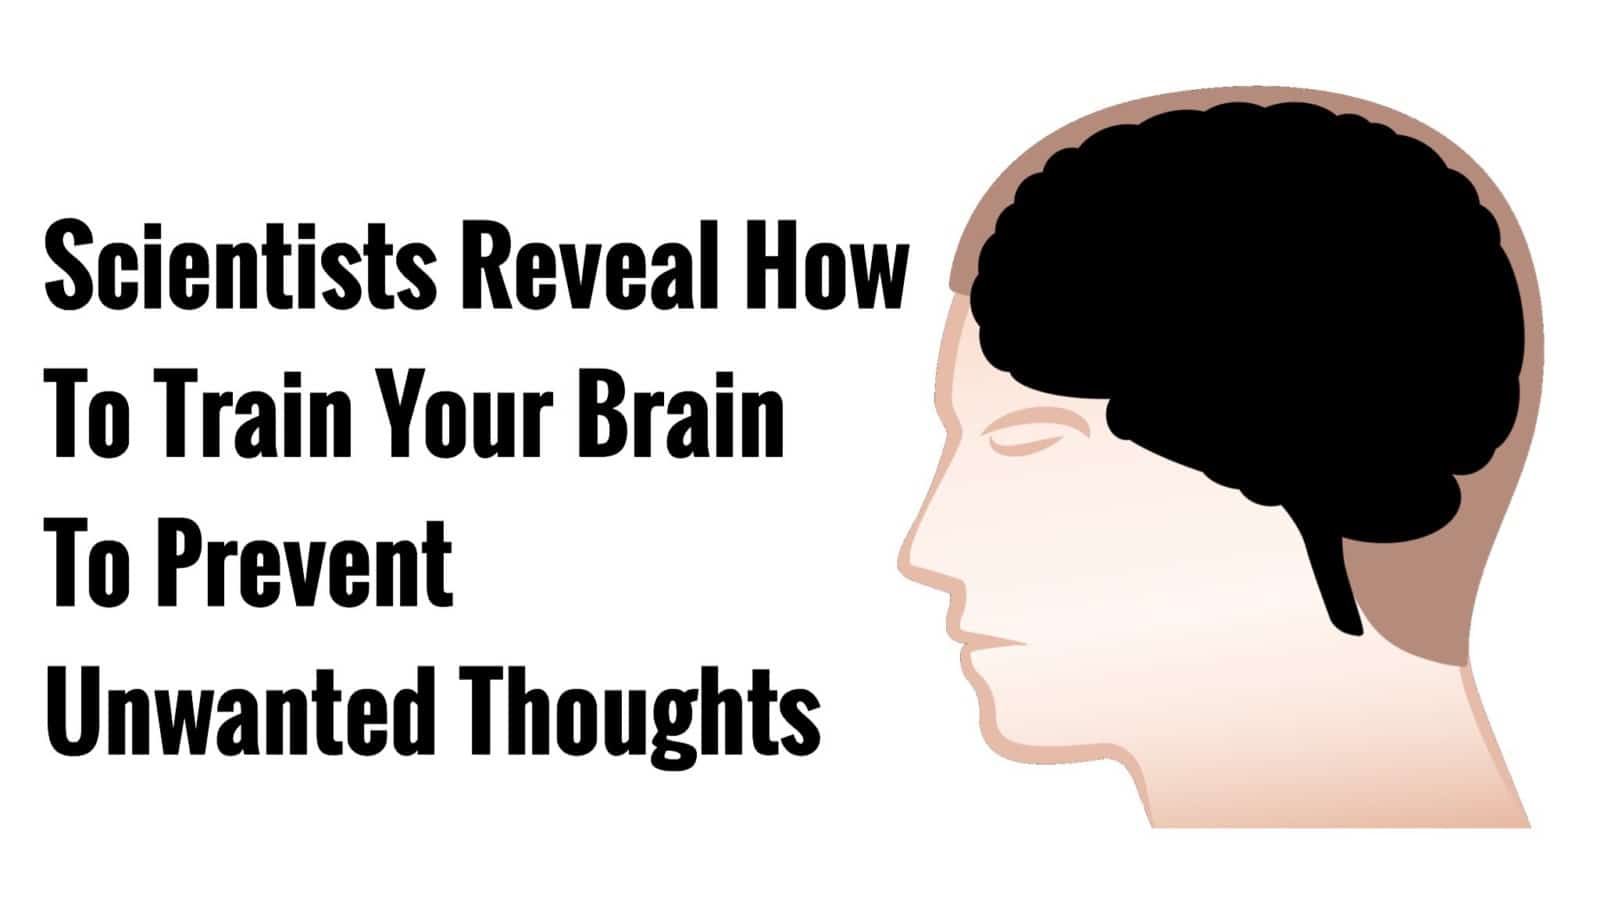 Scientists Reveal How to Train Your Brain To Prevent Unwanted Thoughts